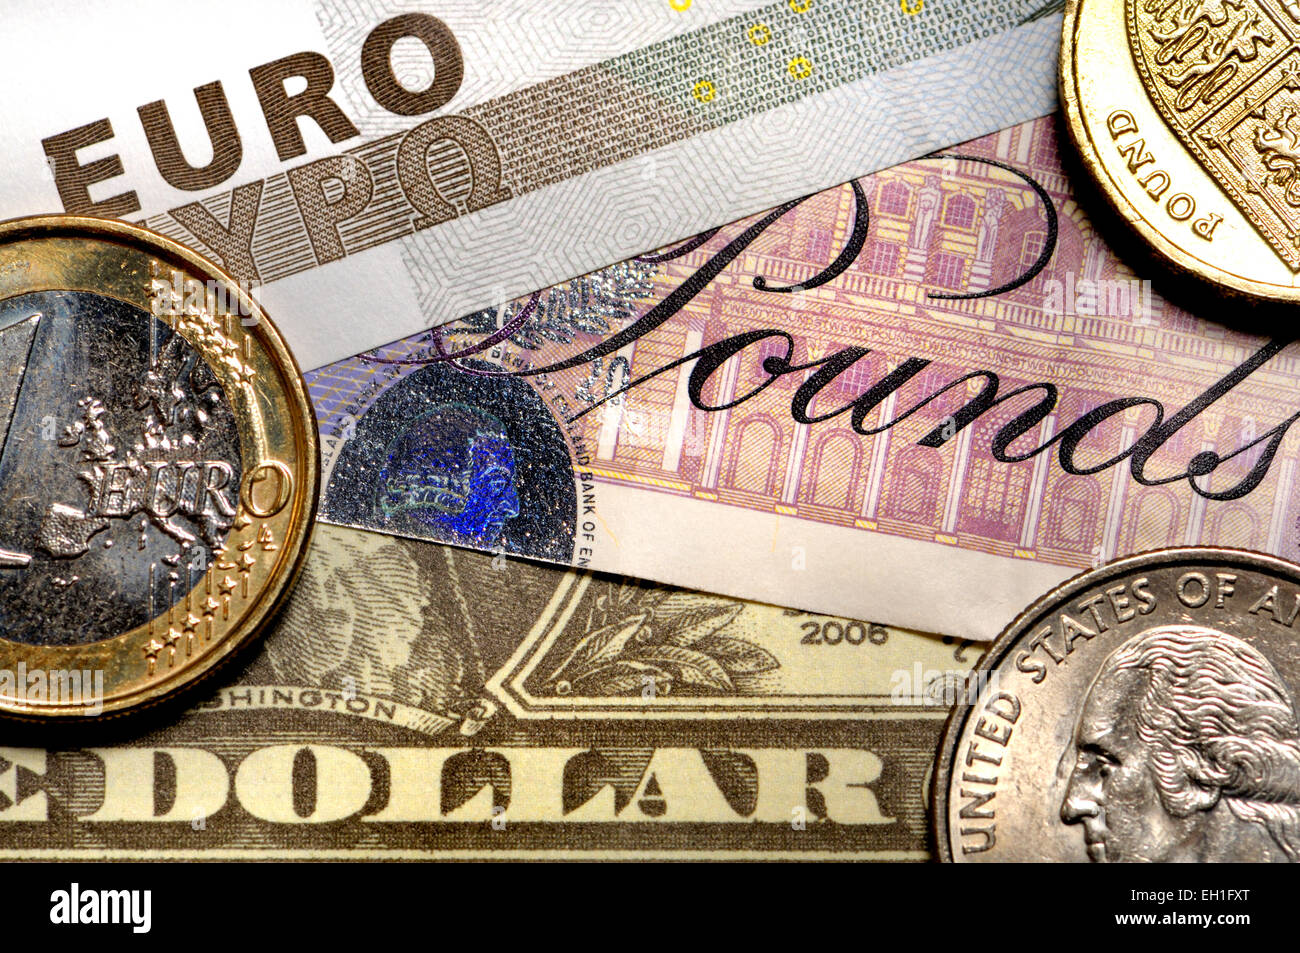 Pounds, Euros and Dollars Stock Photo